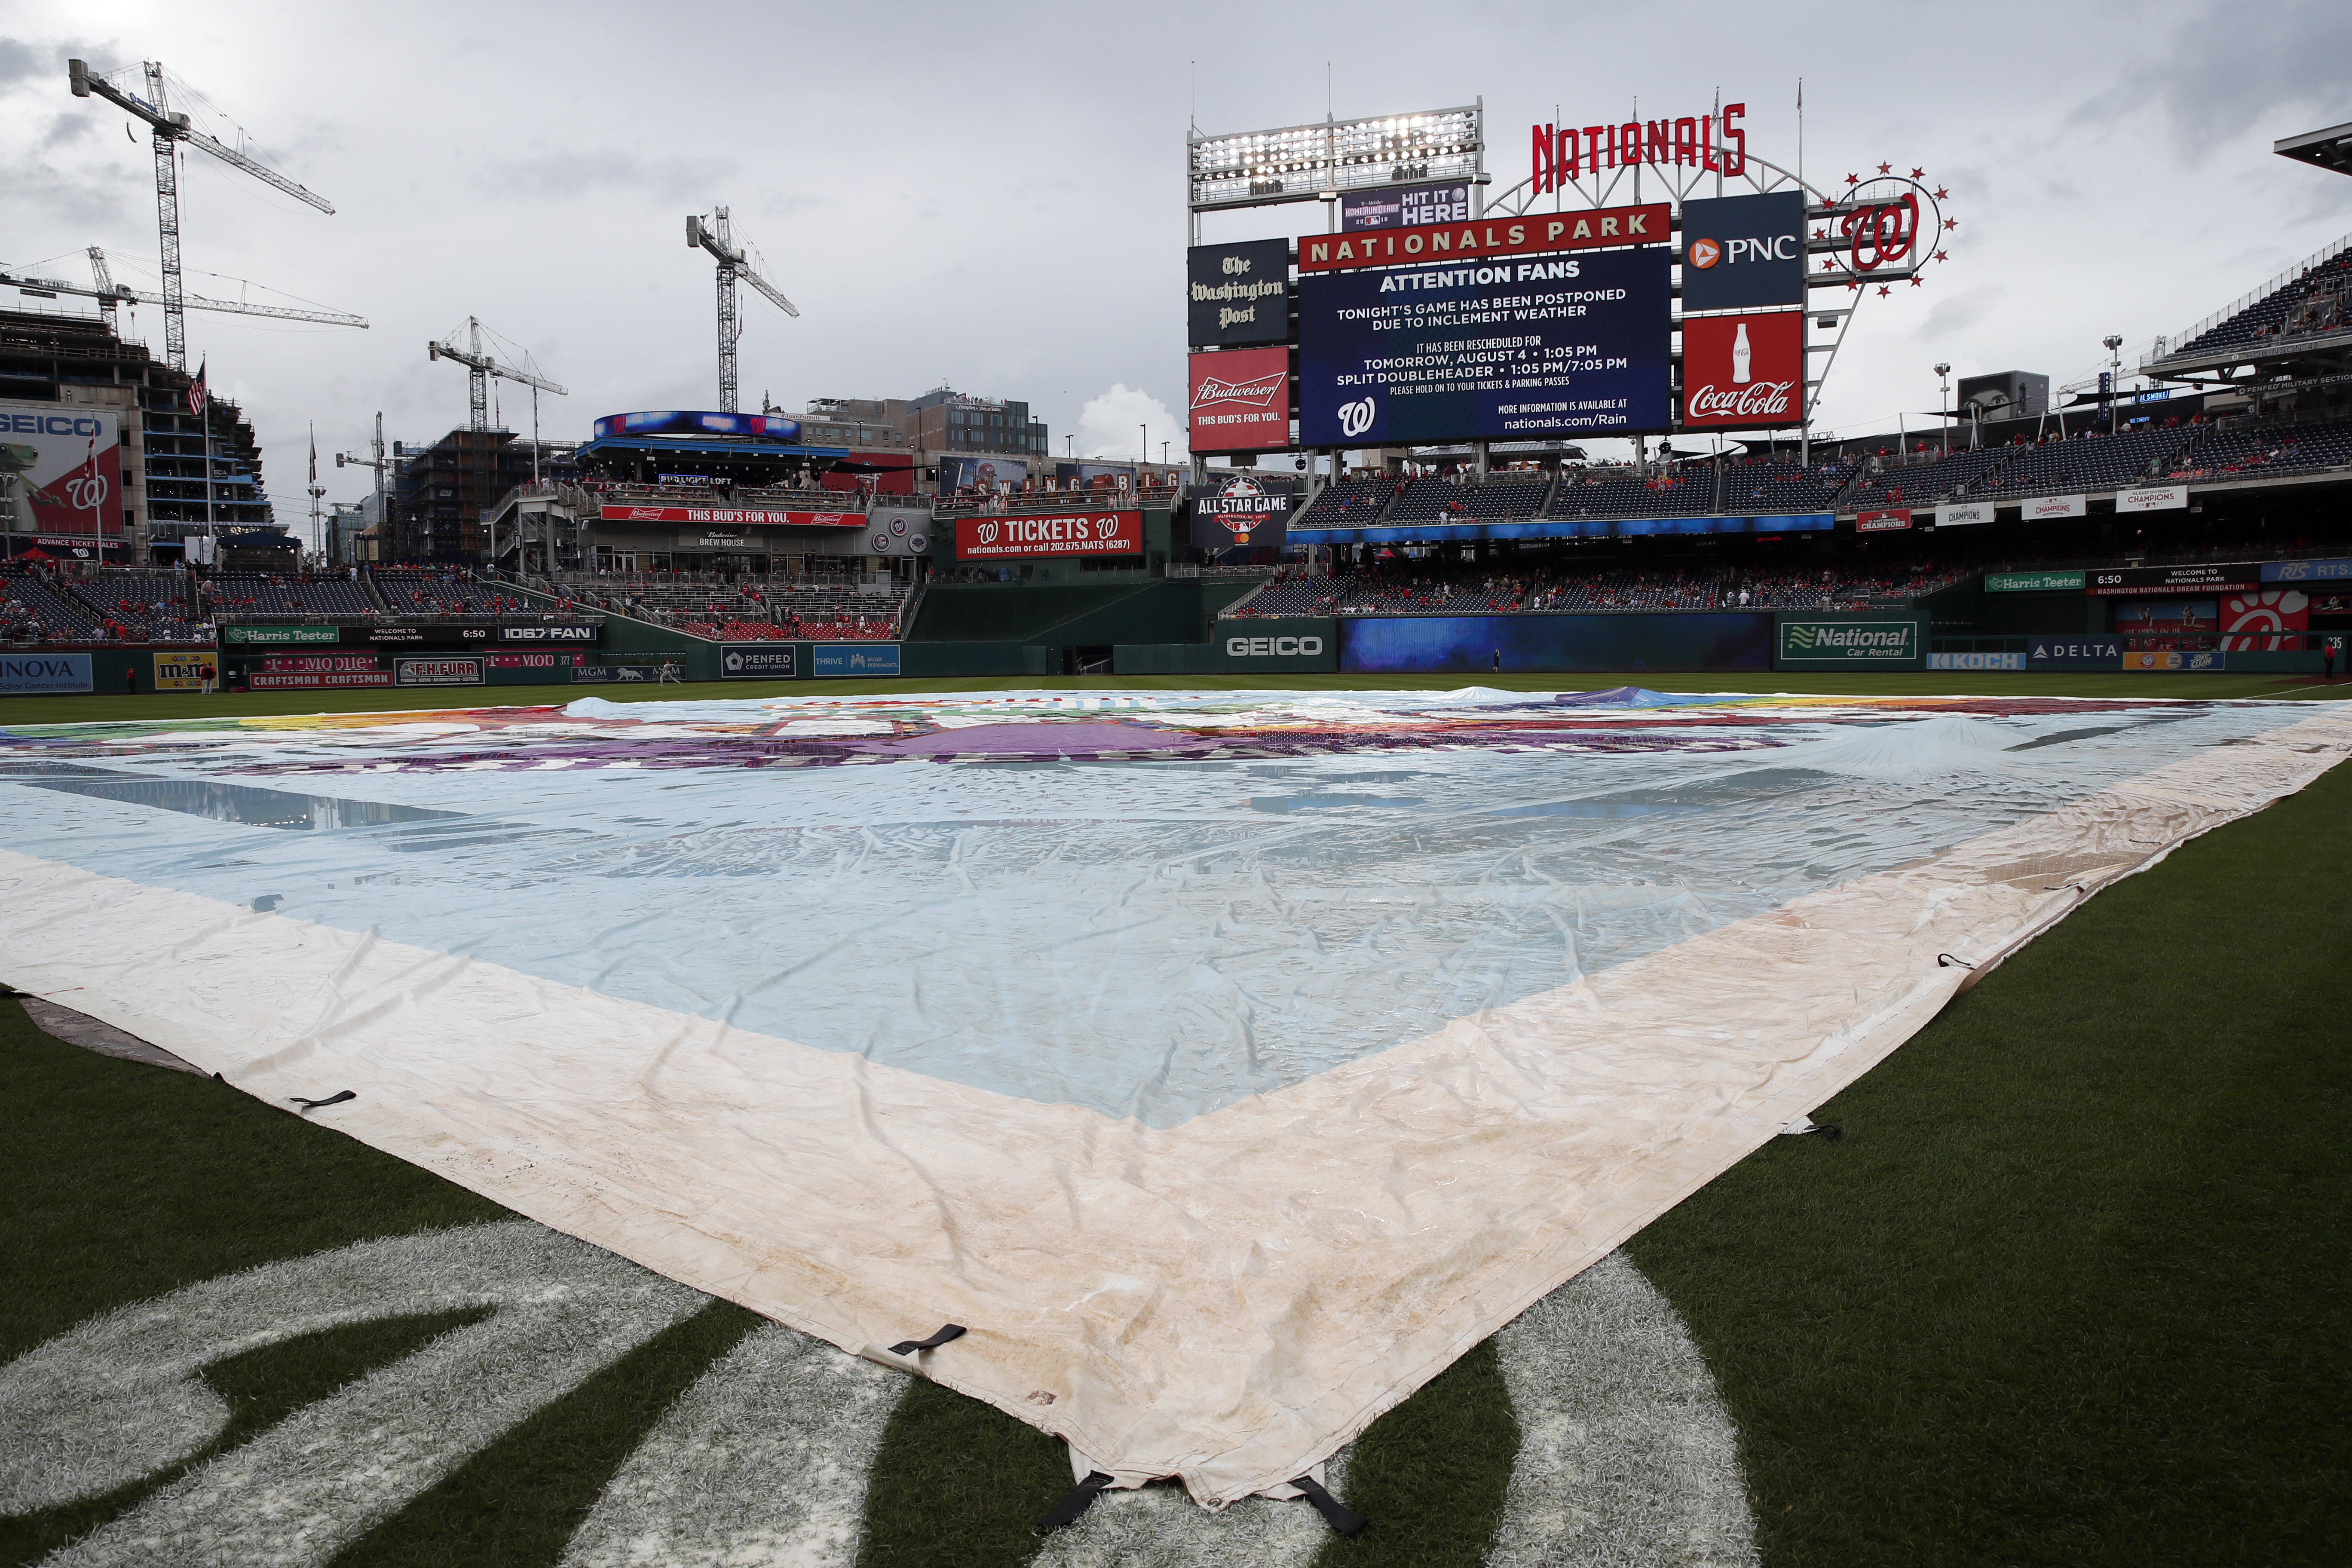 Reds, Nationals postponed; doubleheader set for Saturday